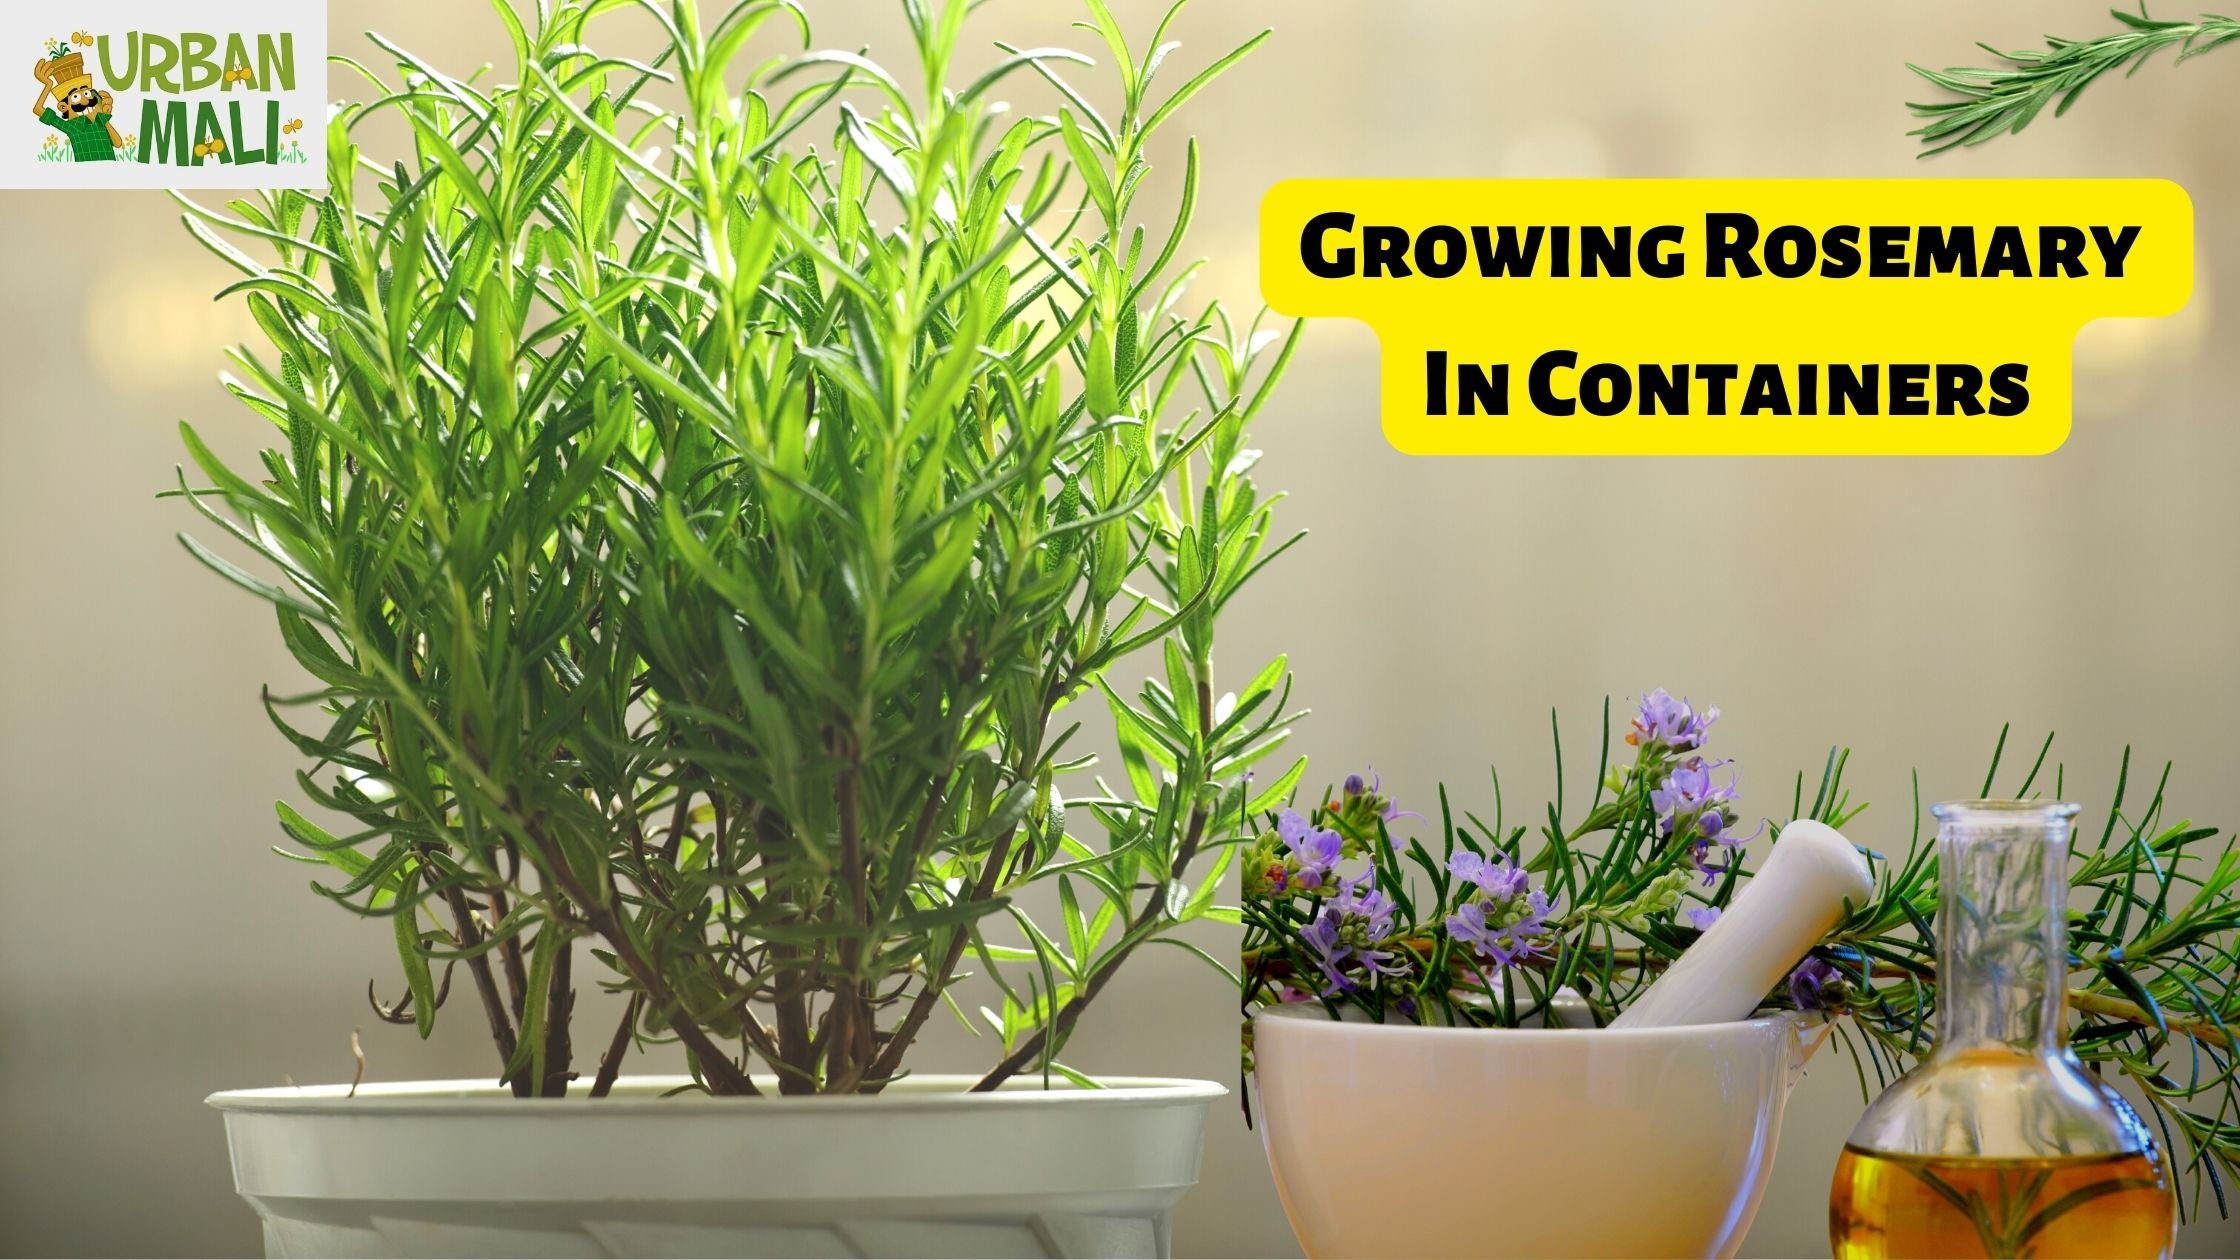 15 Tips for Growing Rosemary in Pots or Containers